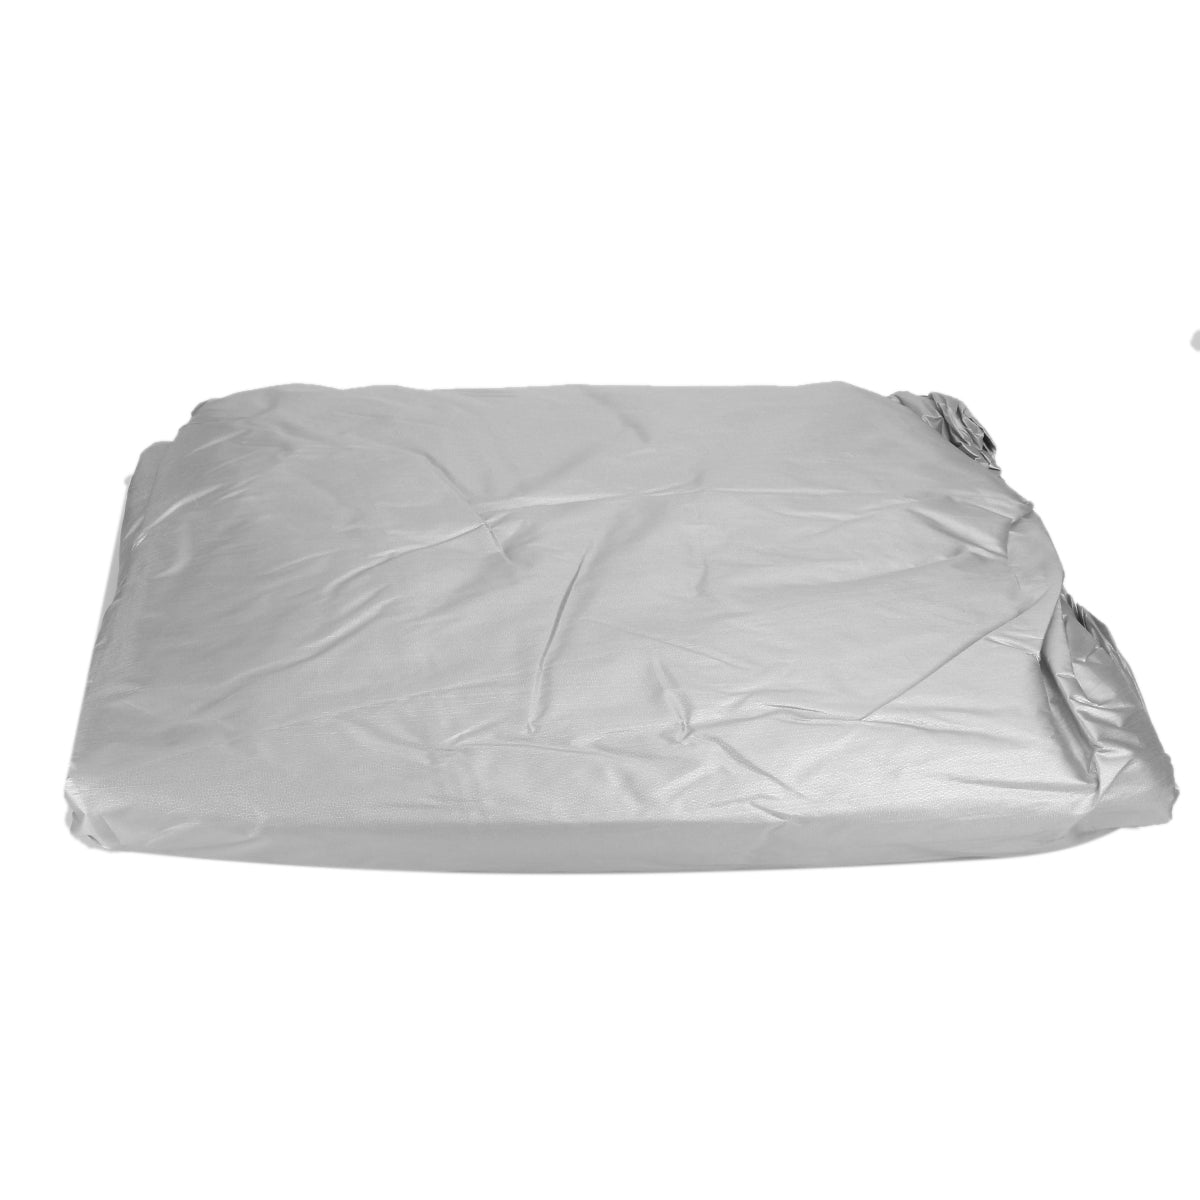 Gray Universal Full Car Cover Cotton Waterproof Breathable Rain Snow Protection